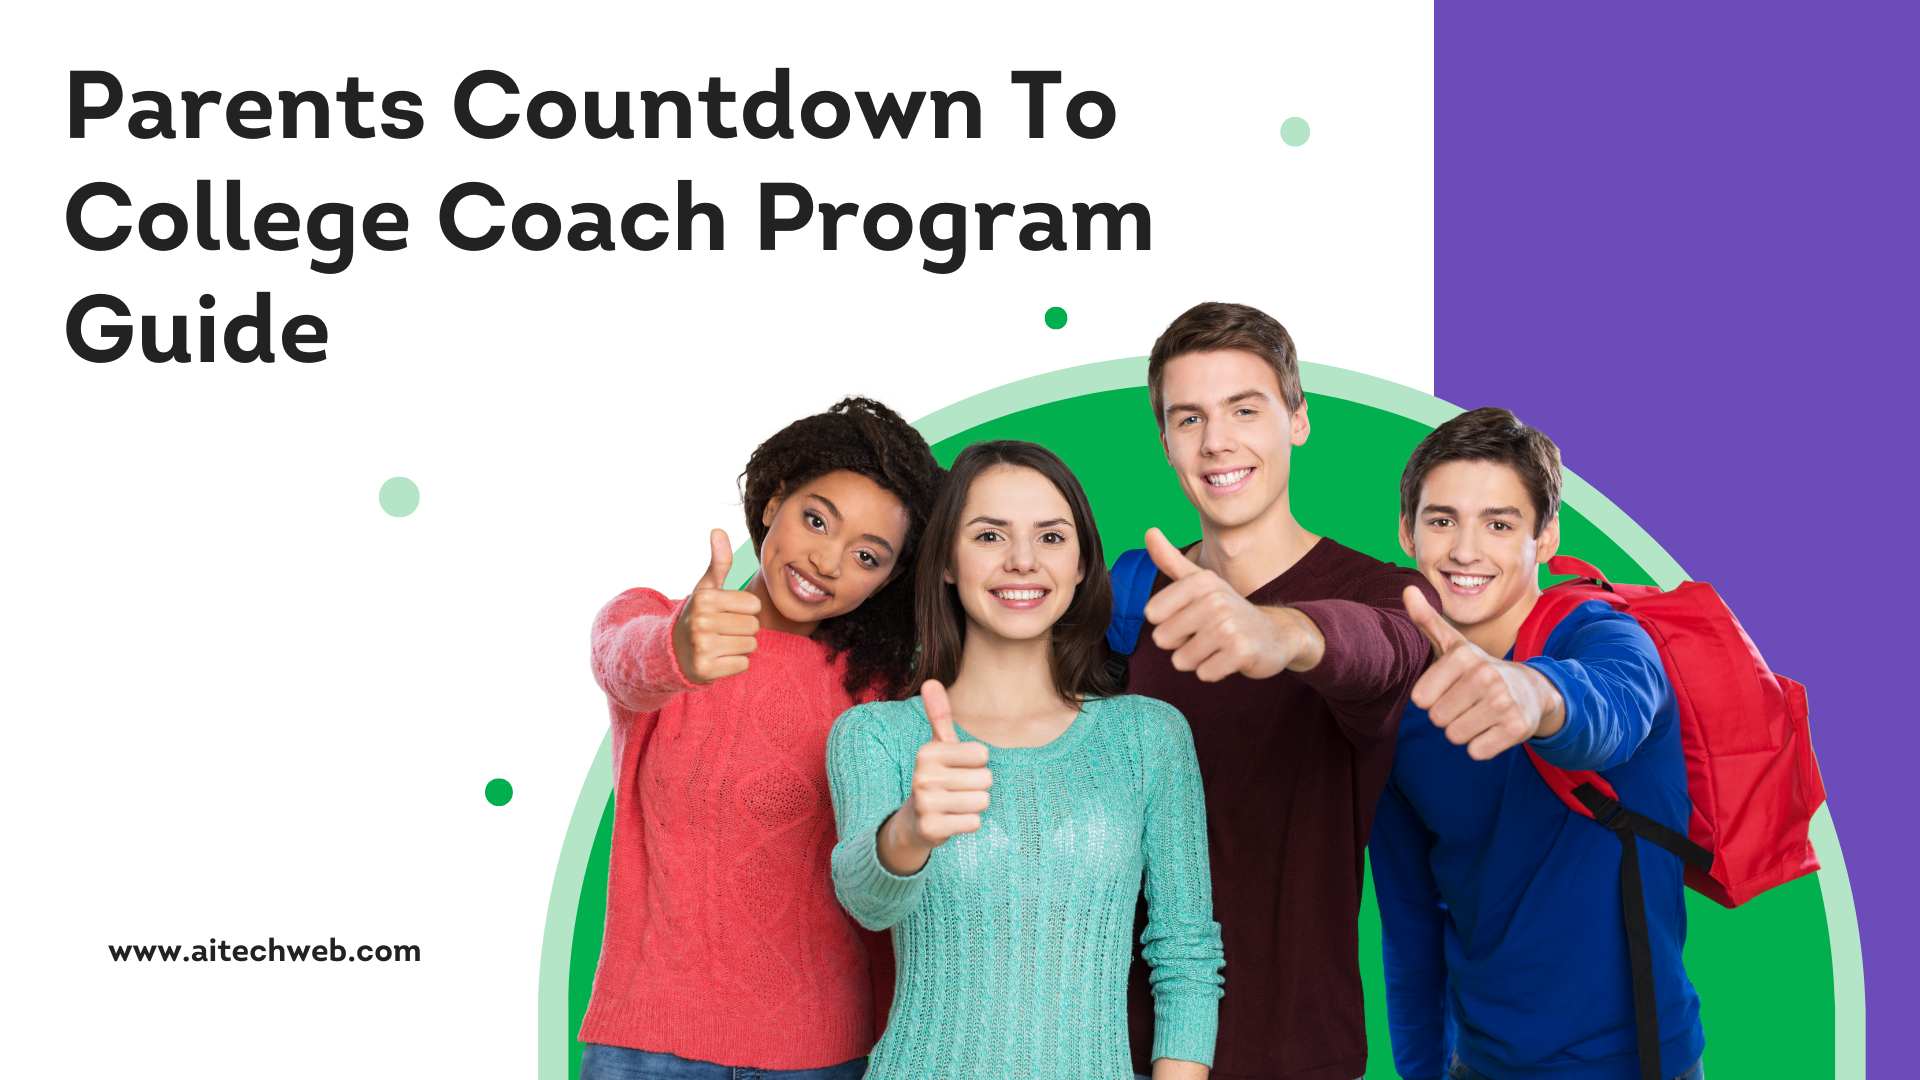 Parents Countdown To College Coach Program Guide